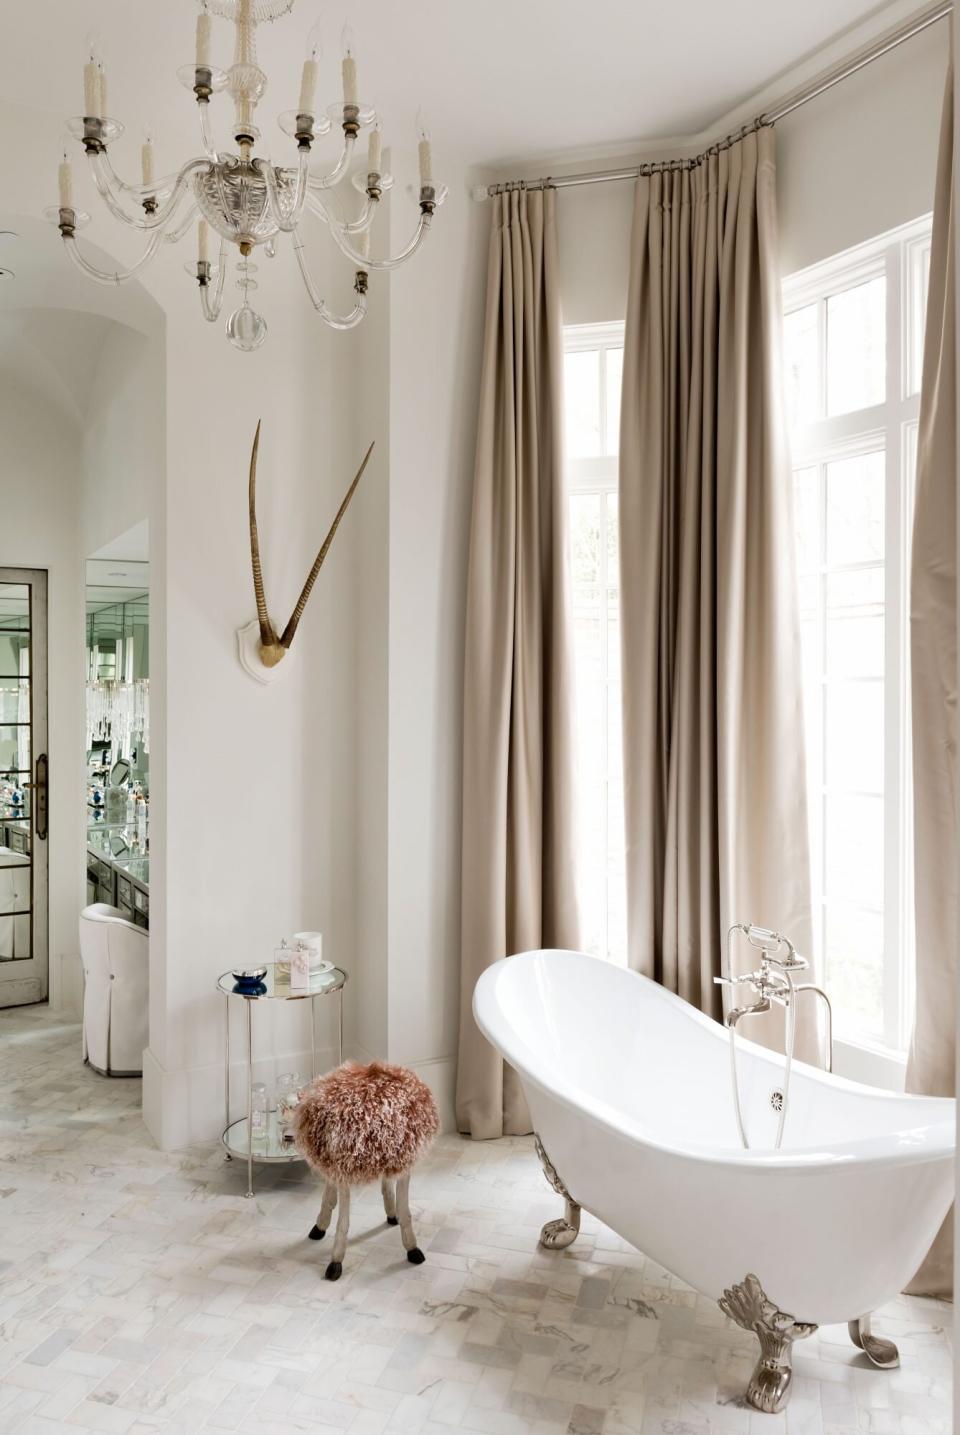 Soaking Tub in Front of Floor-to-Ceiling Windows with Draperies